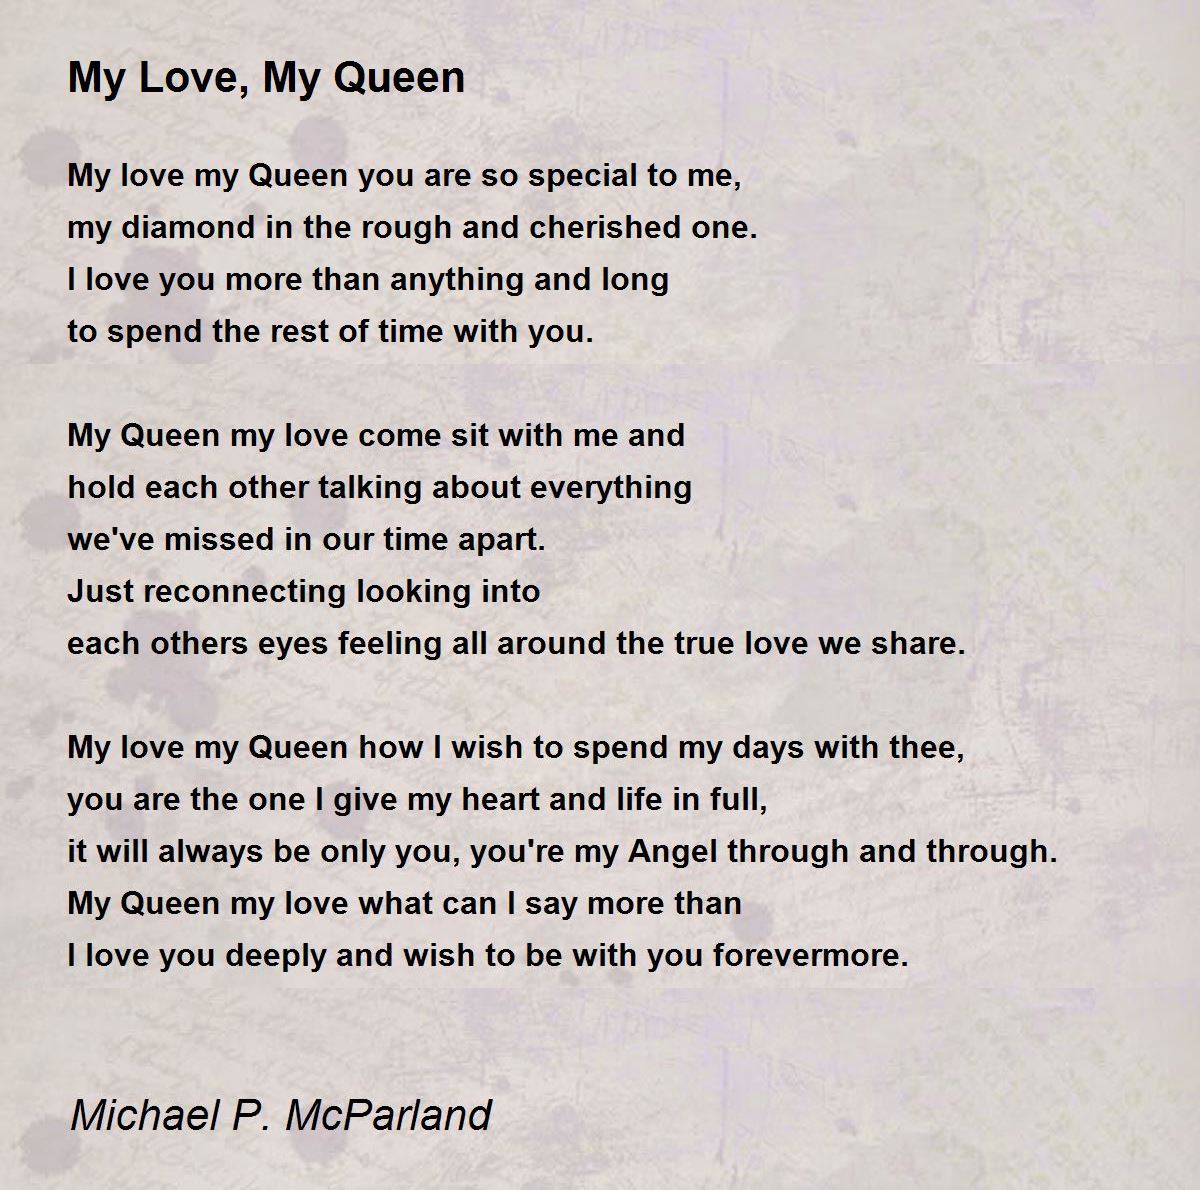 My Love, My Queen - My Love, My Queen Poem by Michael P. McParland